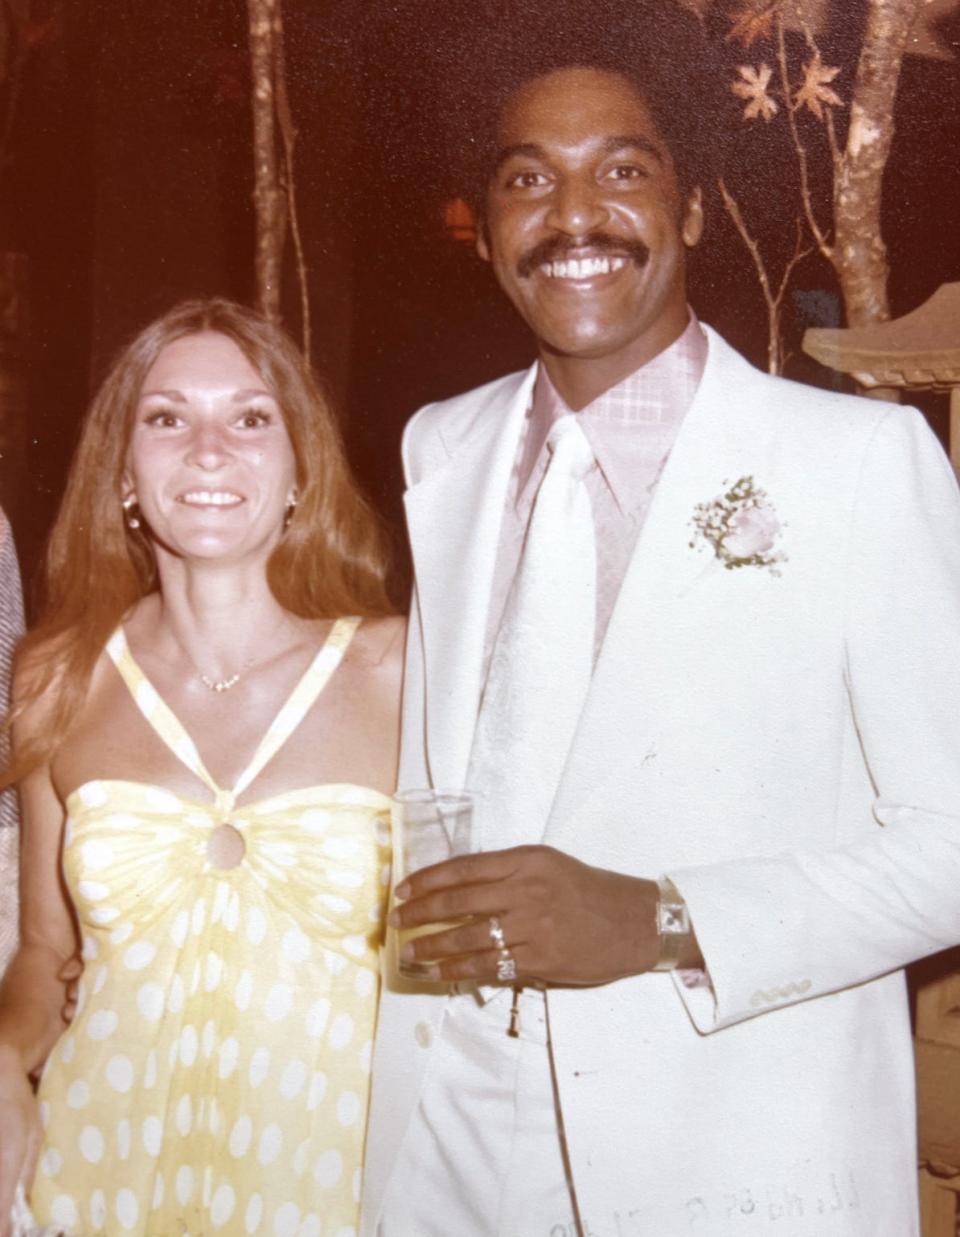 Roger and Jeannie Brown, grandparents of Hudson Mayes, met at a night club. She was a waitress and dancer and he was an ABA Pacer player.